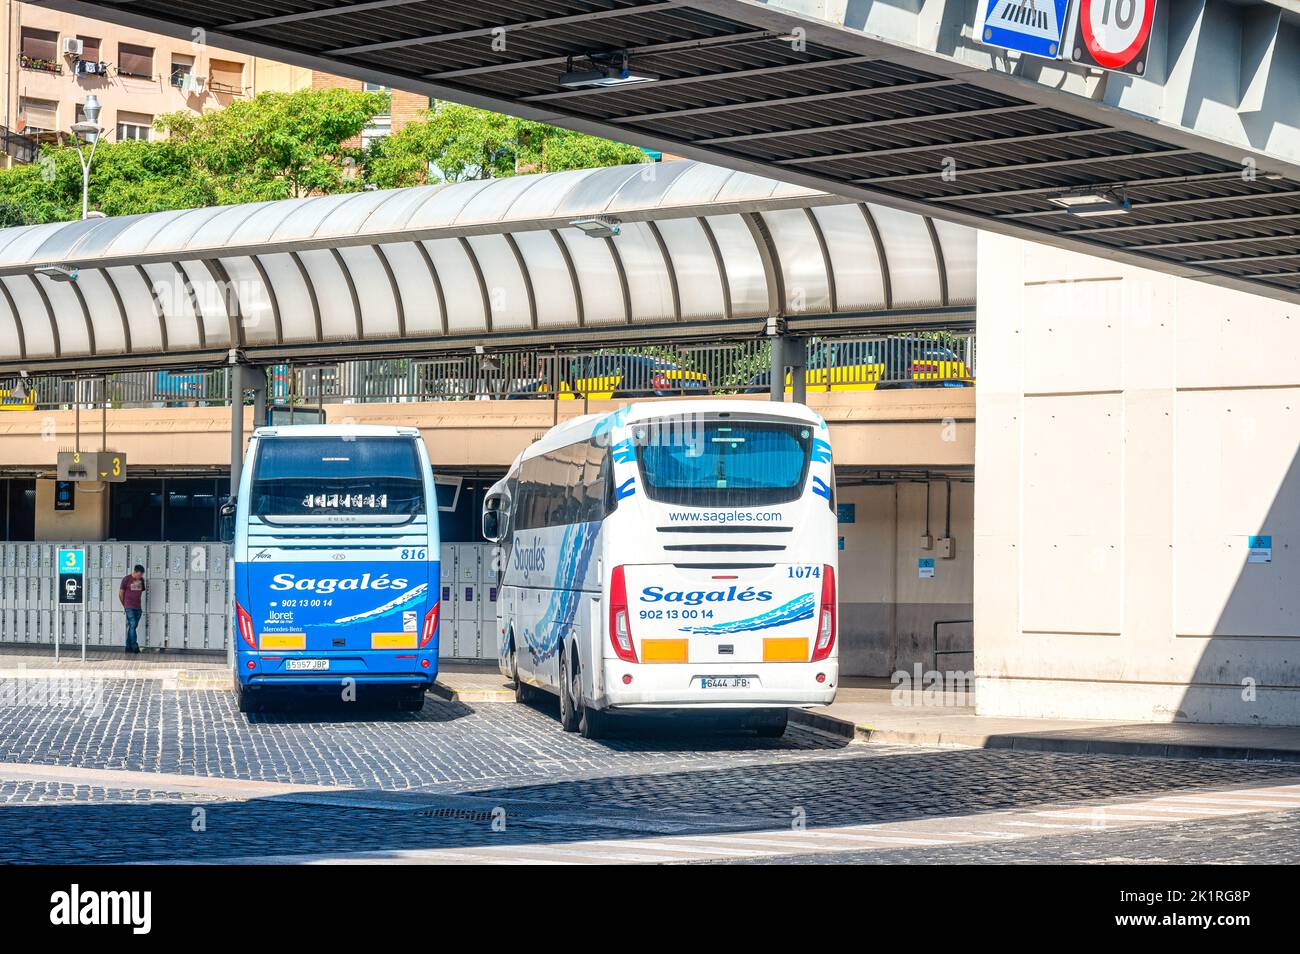 Barcelona Nord Bus Station. Two stationary buses in the platform of the transportation building. They have a sign reading 'Sagales.' Stock Photo